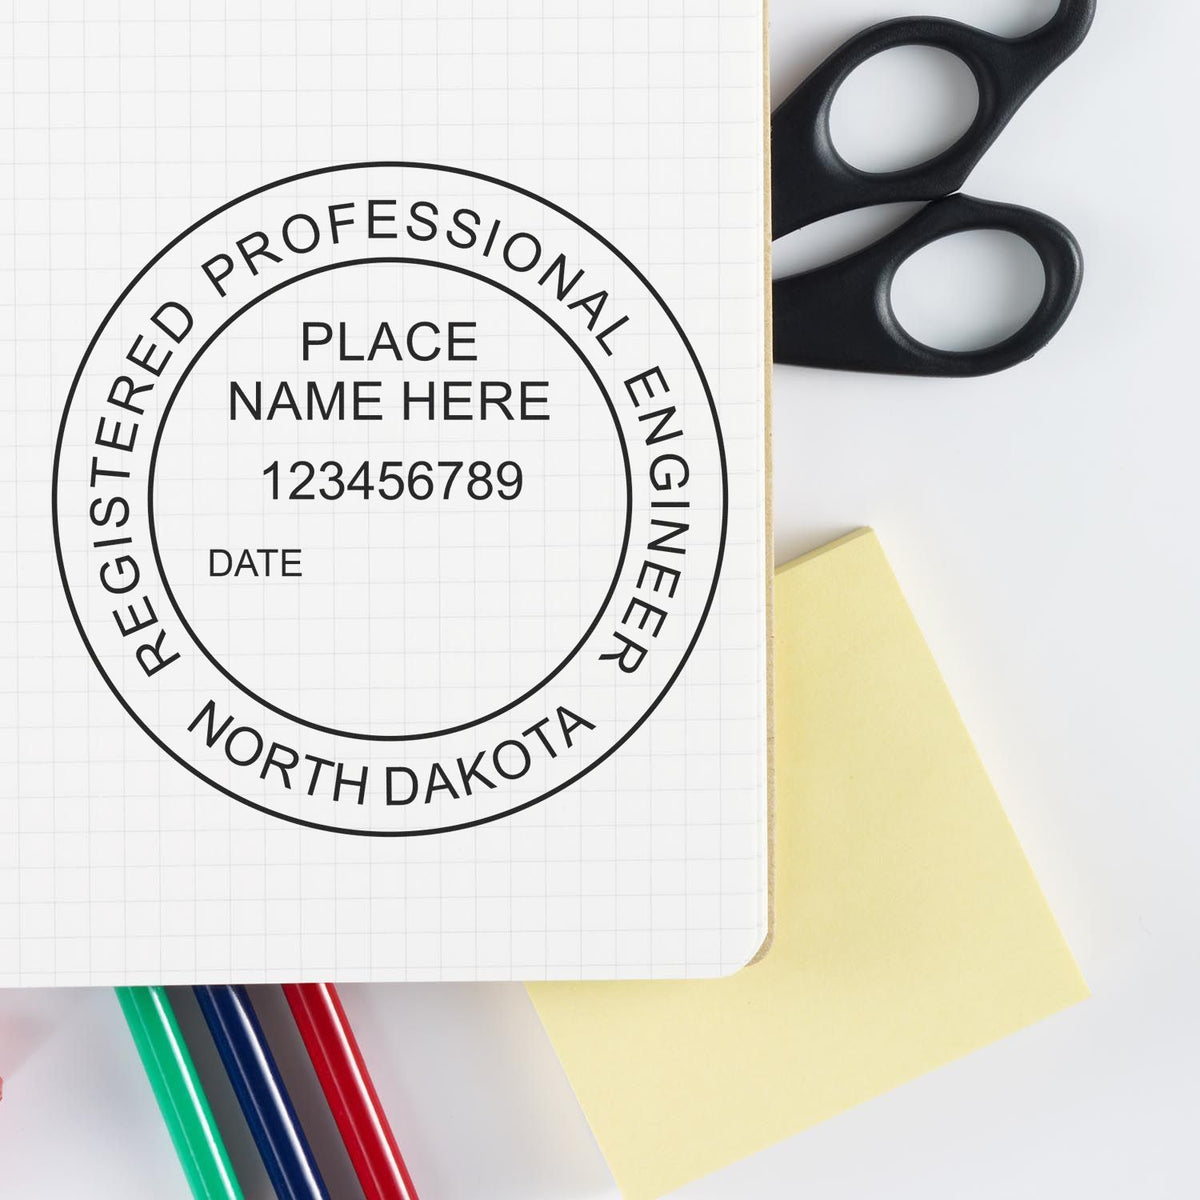 This paper is stamped with a sample imprint of the North Dakota Professional Engineer Seal Stamp, signifying its quality and reliability.